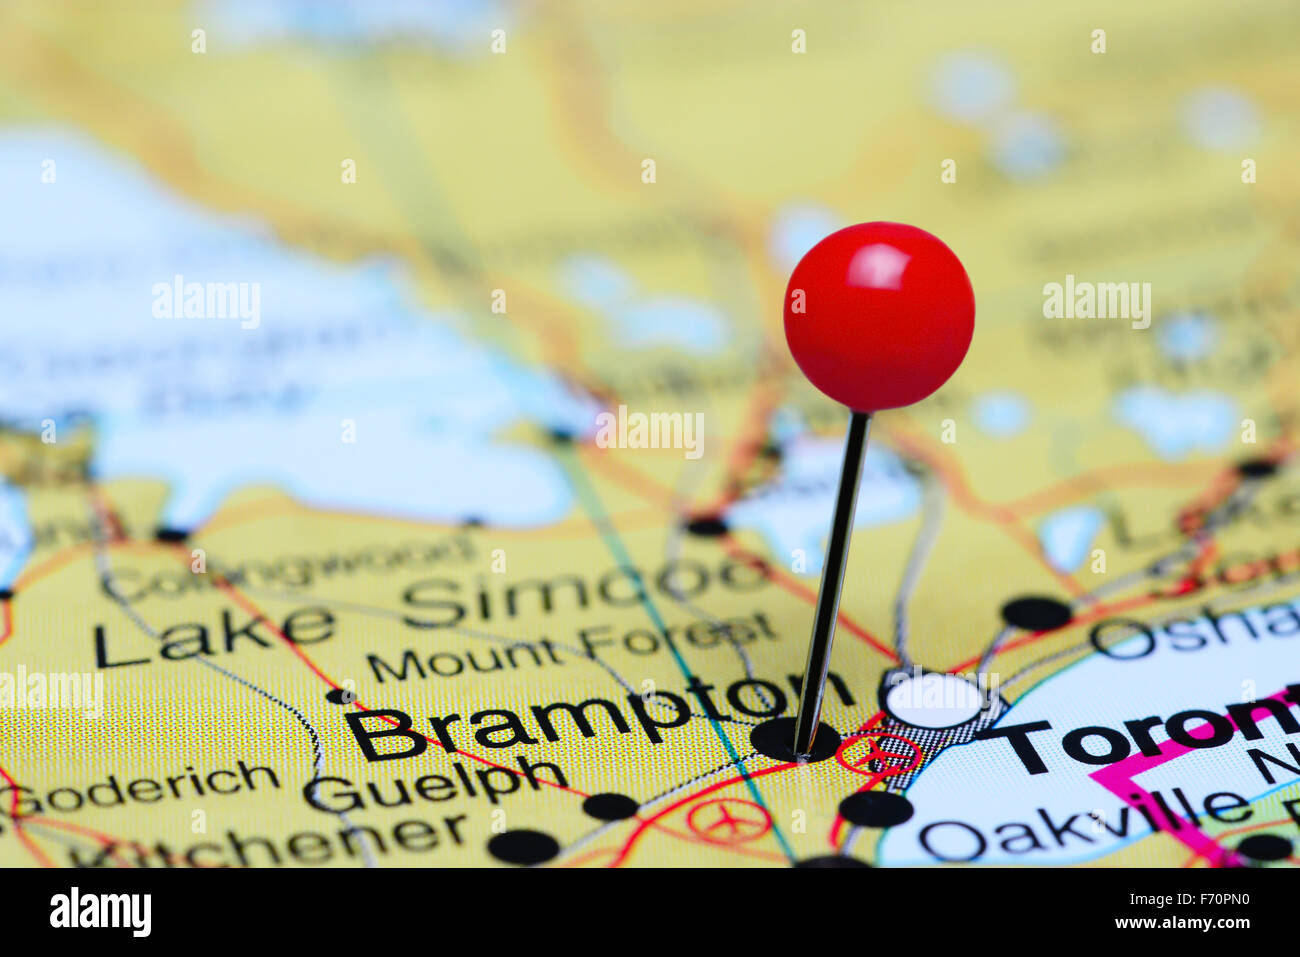 Brampton pinned on a map of Canada Stock Photo